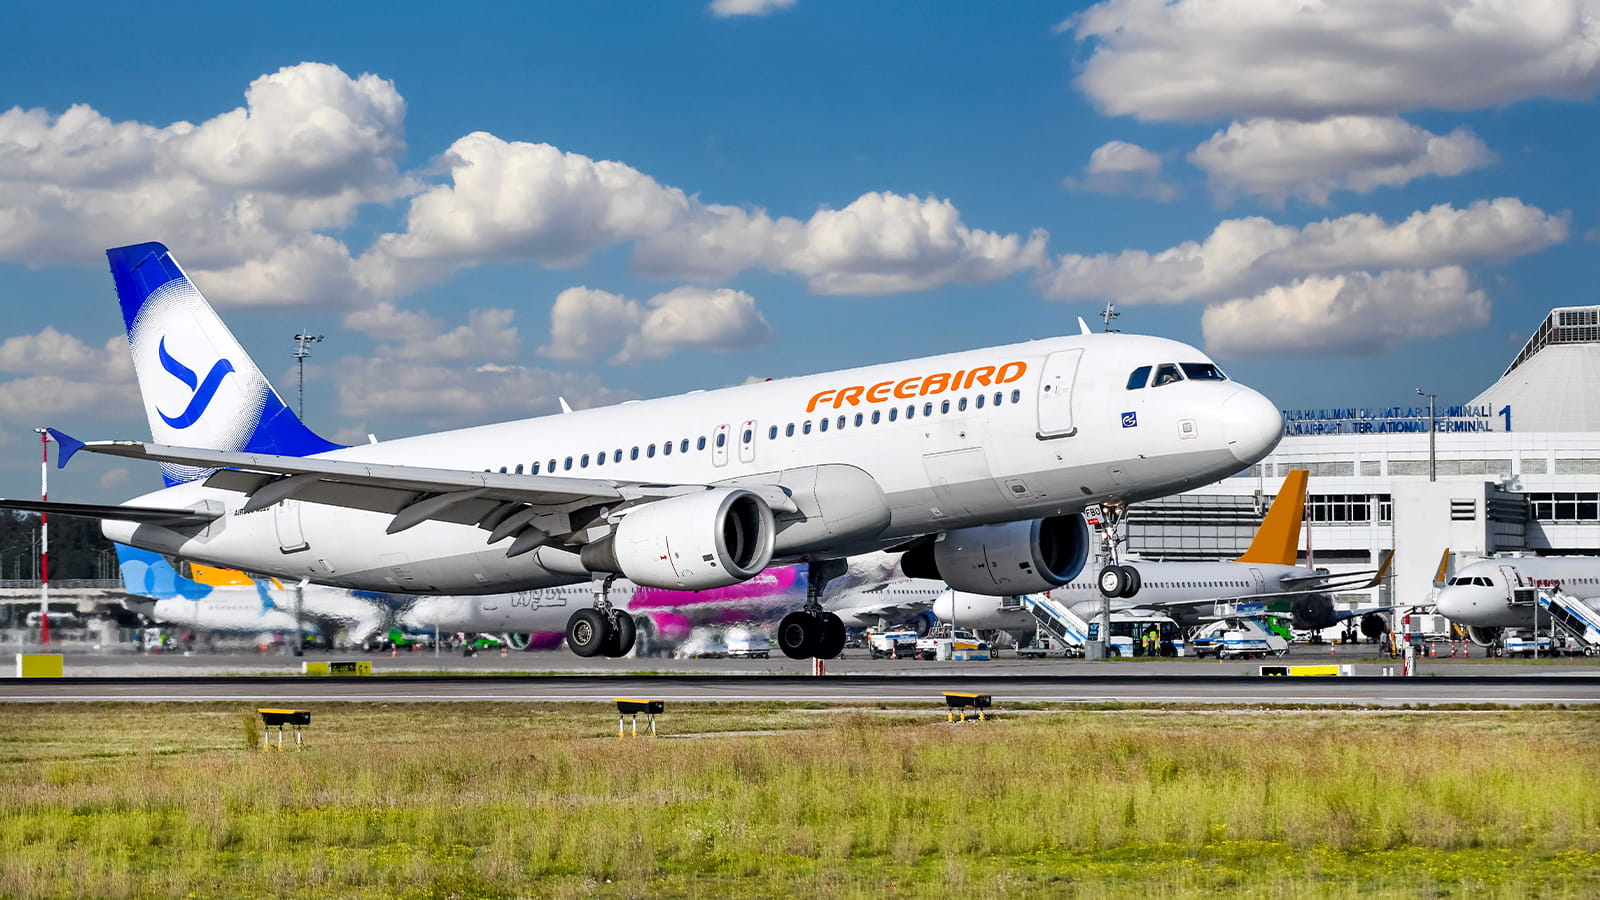 Freebird Airlines selects RTX's Collins Aerospace to implement Ascentia software to its A320 fleet